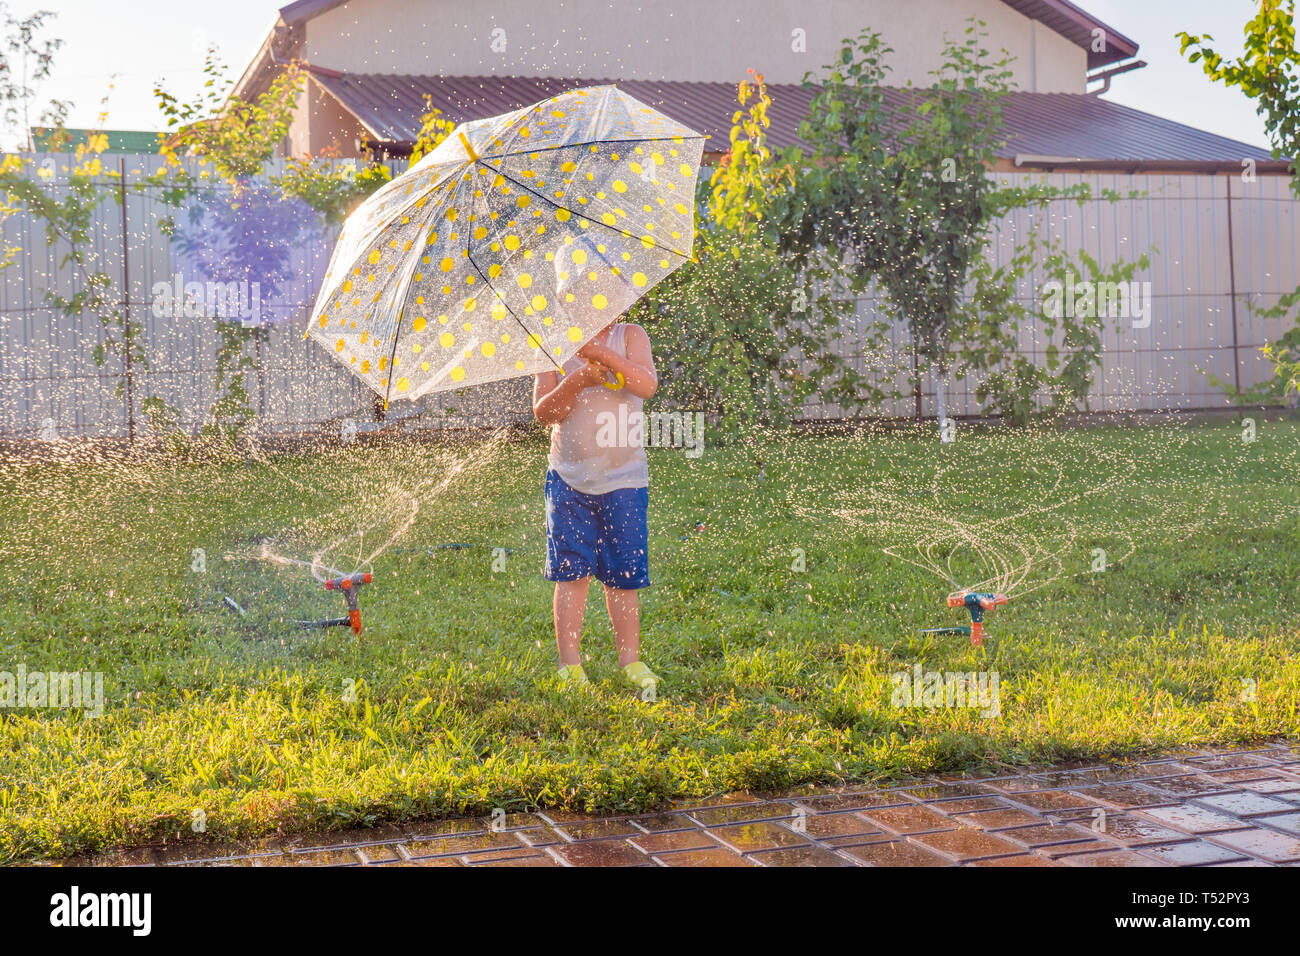 A kid running through water drops of the fontain on front yard with automatic watering system. Exciting games outdoor. Boy with umbrella playing on Stock Photo